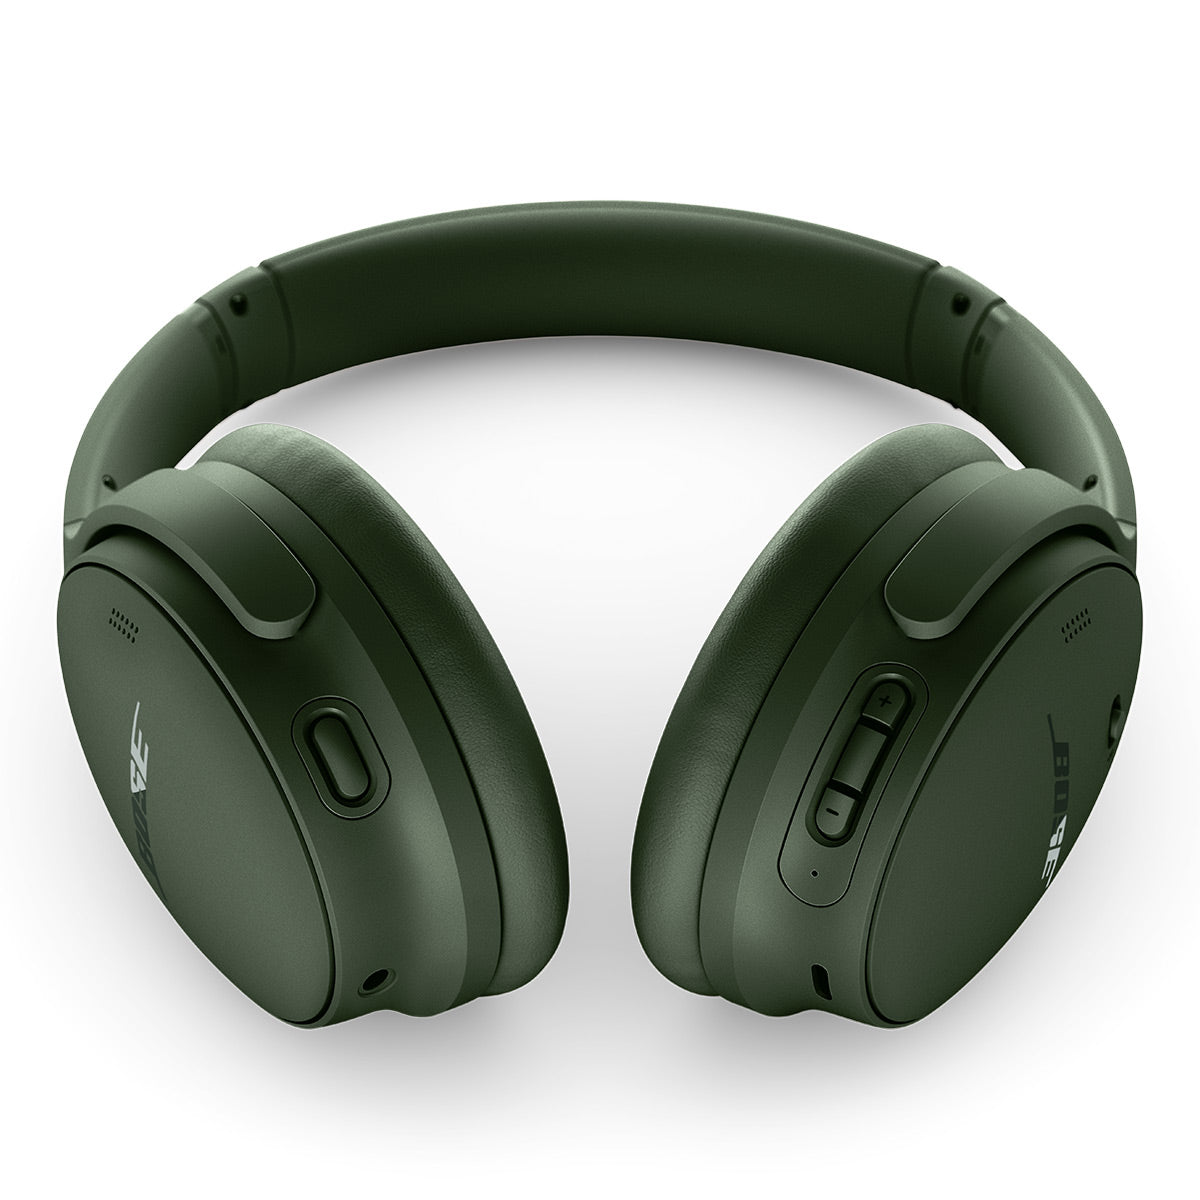 Bose QuietComfort Headphones with Active Noise Cancellation with QuietComfort Ultra Wireless Noise Cancelling Earbuds (Cypress Green/Black)